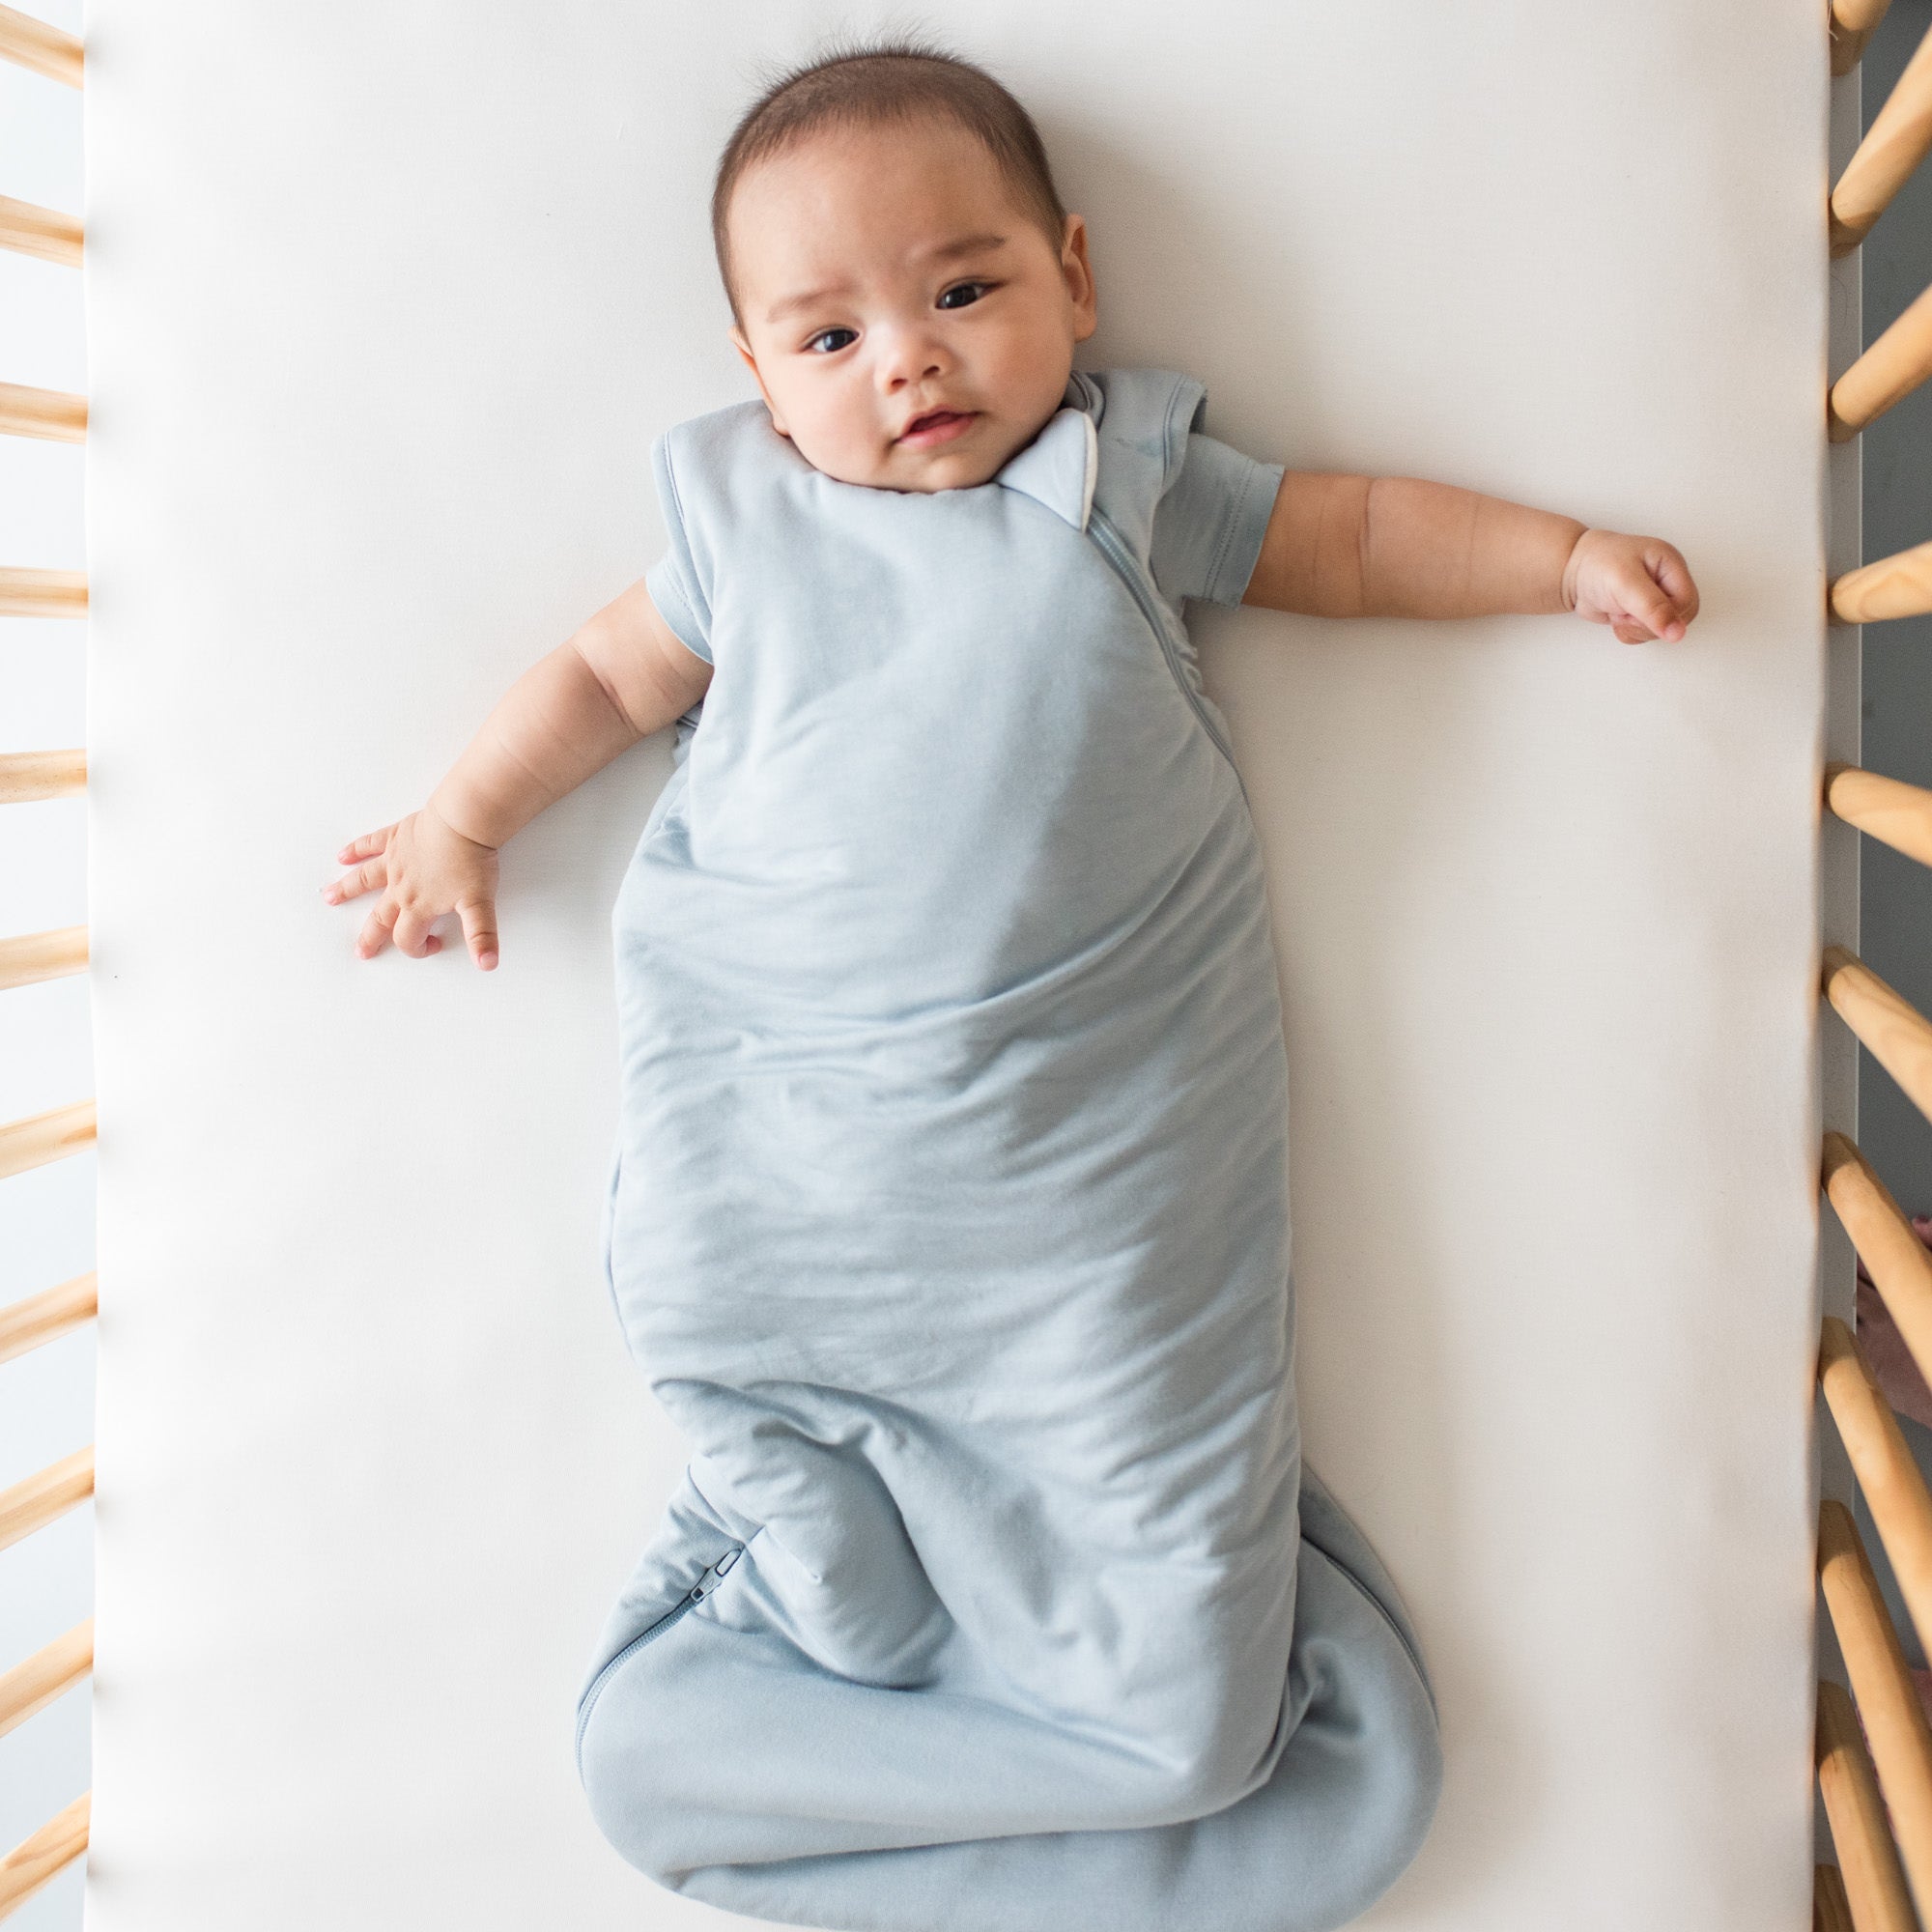 Why Are Parents Boycotting Kyte Baby Sleep Gear? Behind the